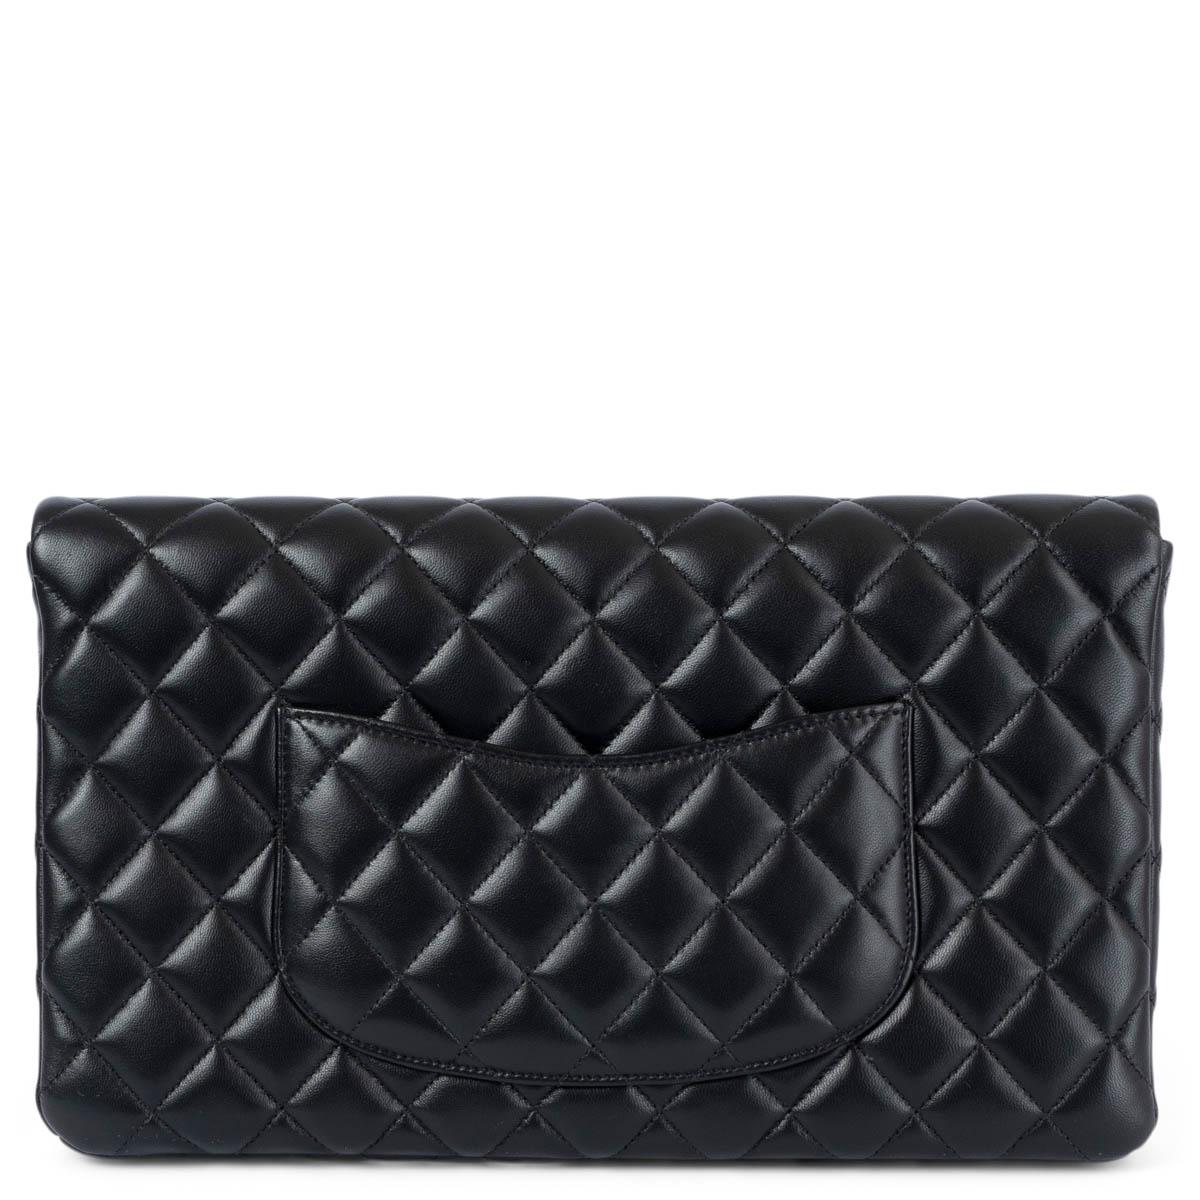 Women's CHANEL black quilted leather 2020 20C FLAP Clutch Bag